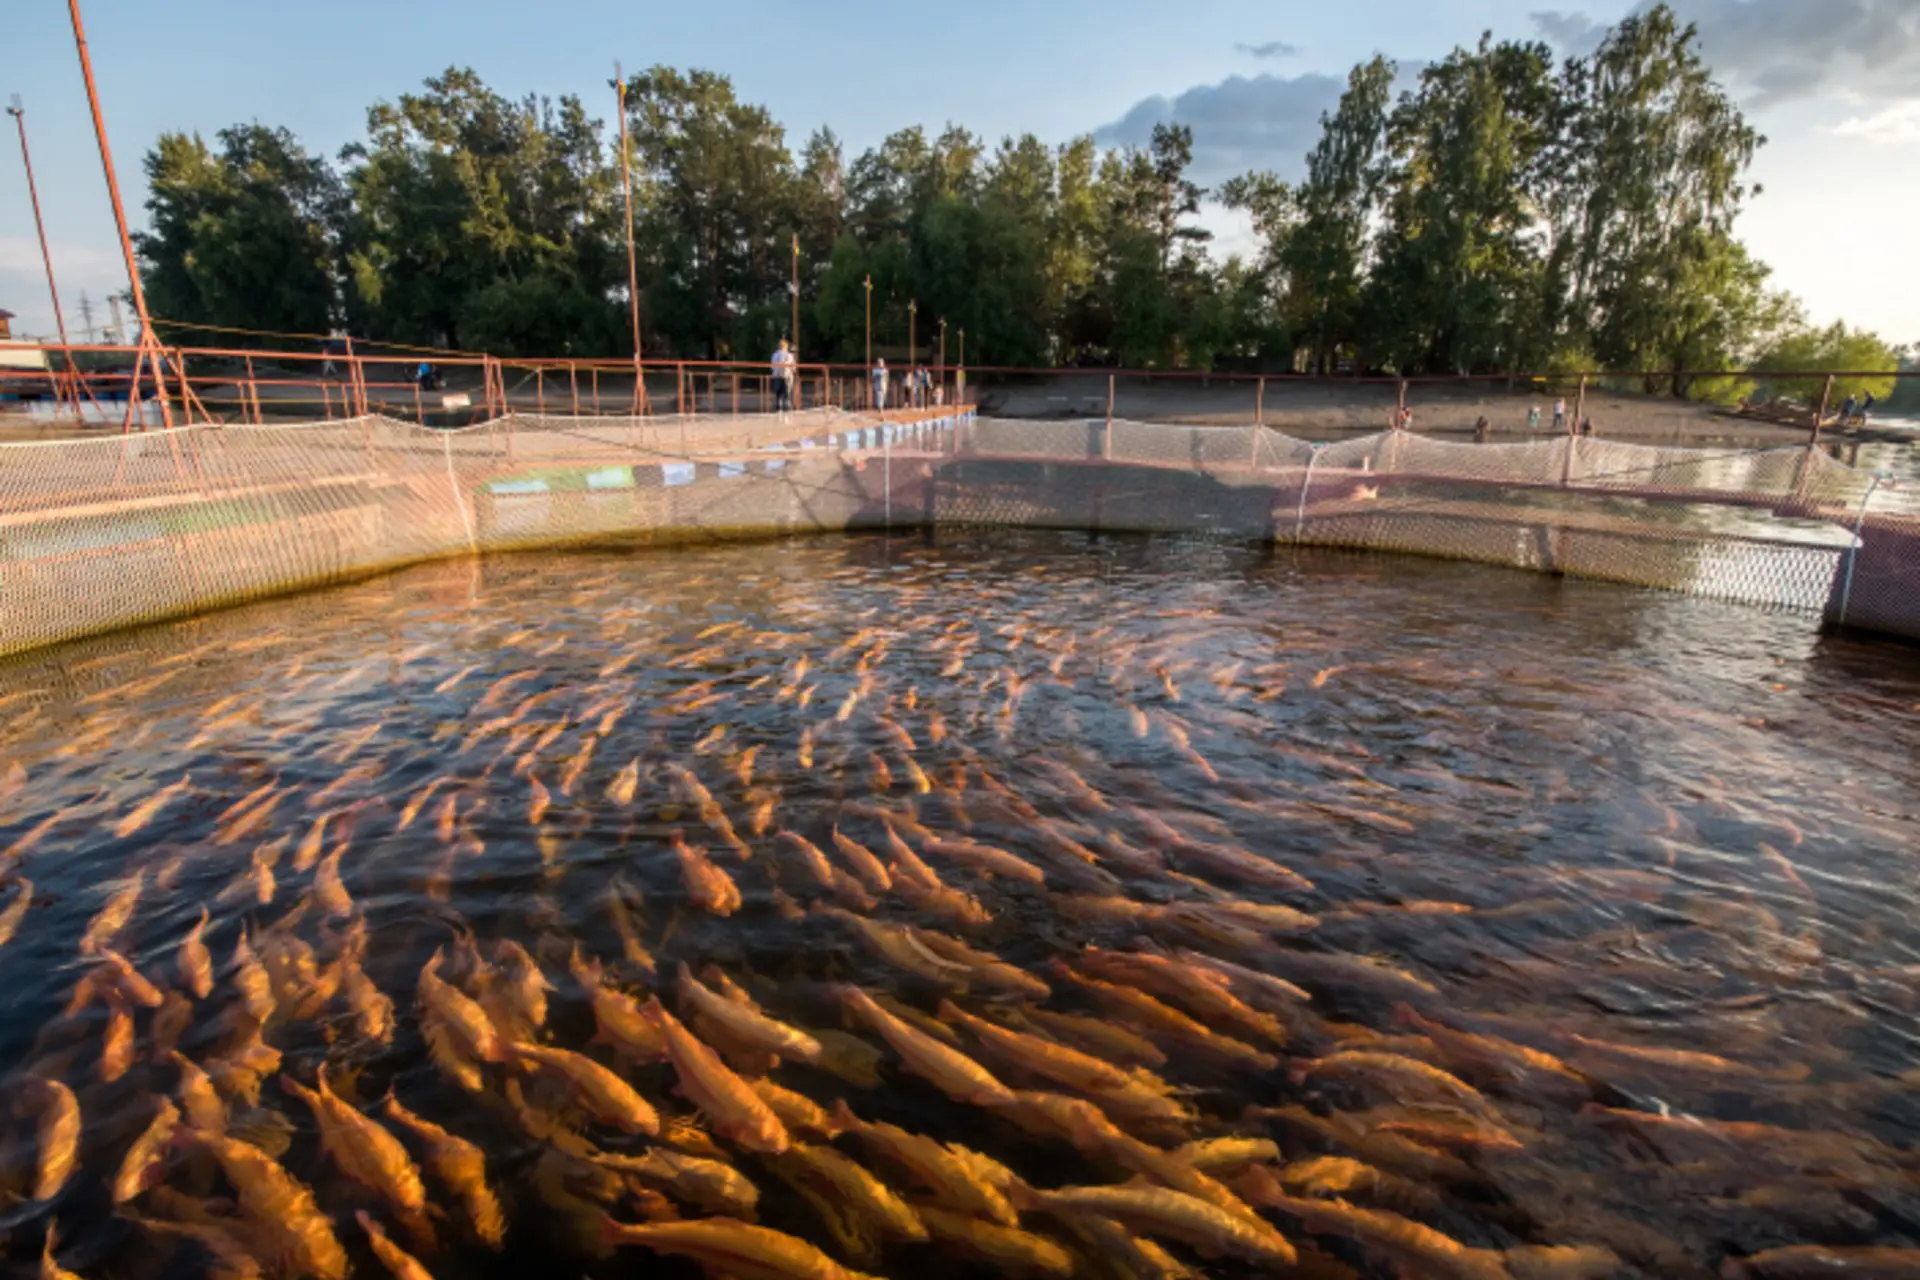 Land-based cold water fish aquaculture